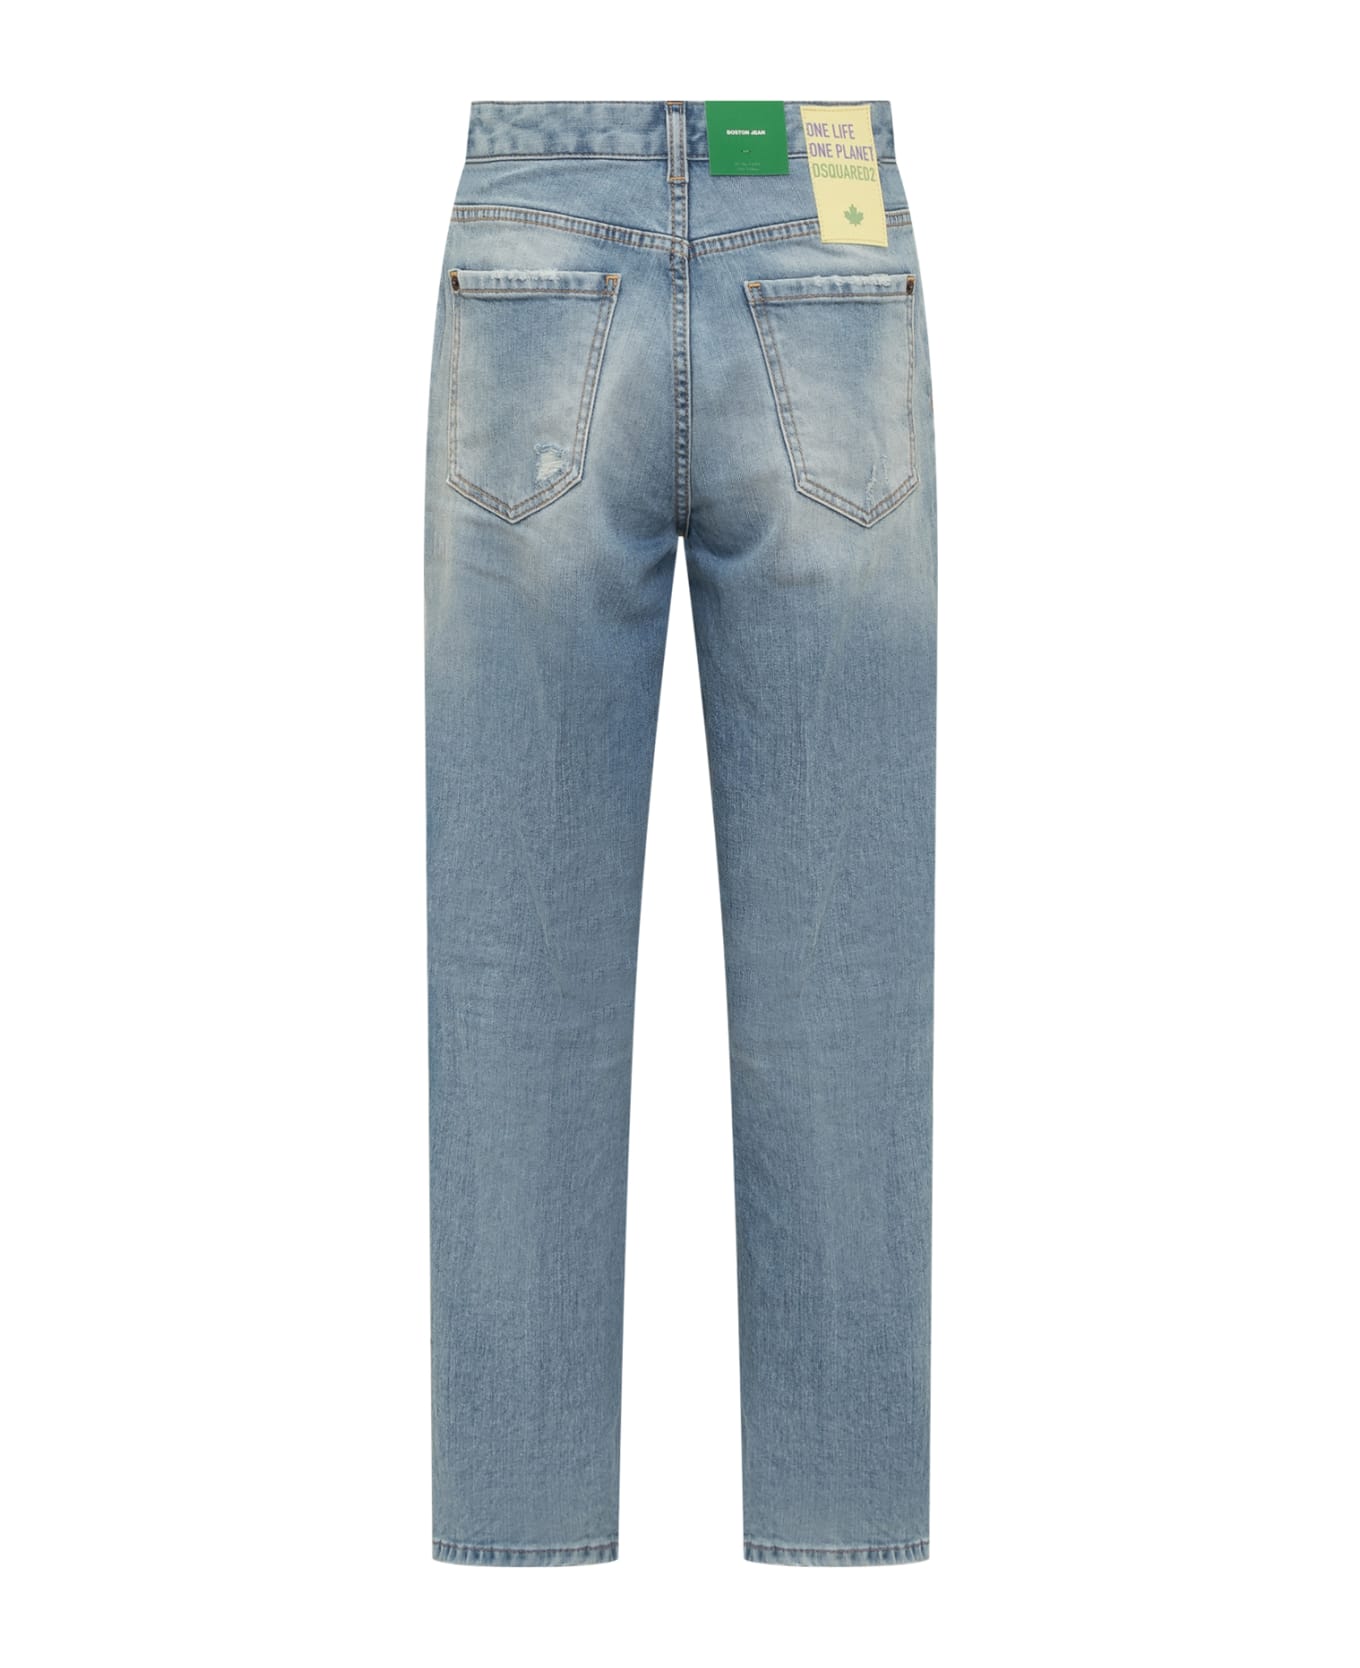 Dsquared2 One Life One Planet Boston Jeans - NAVY BLUE